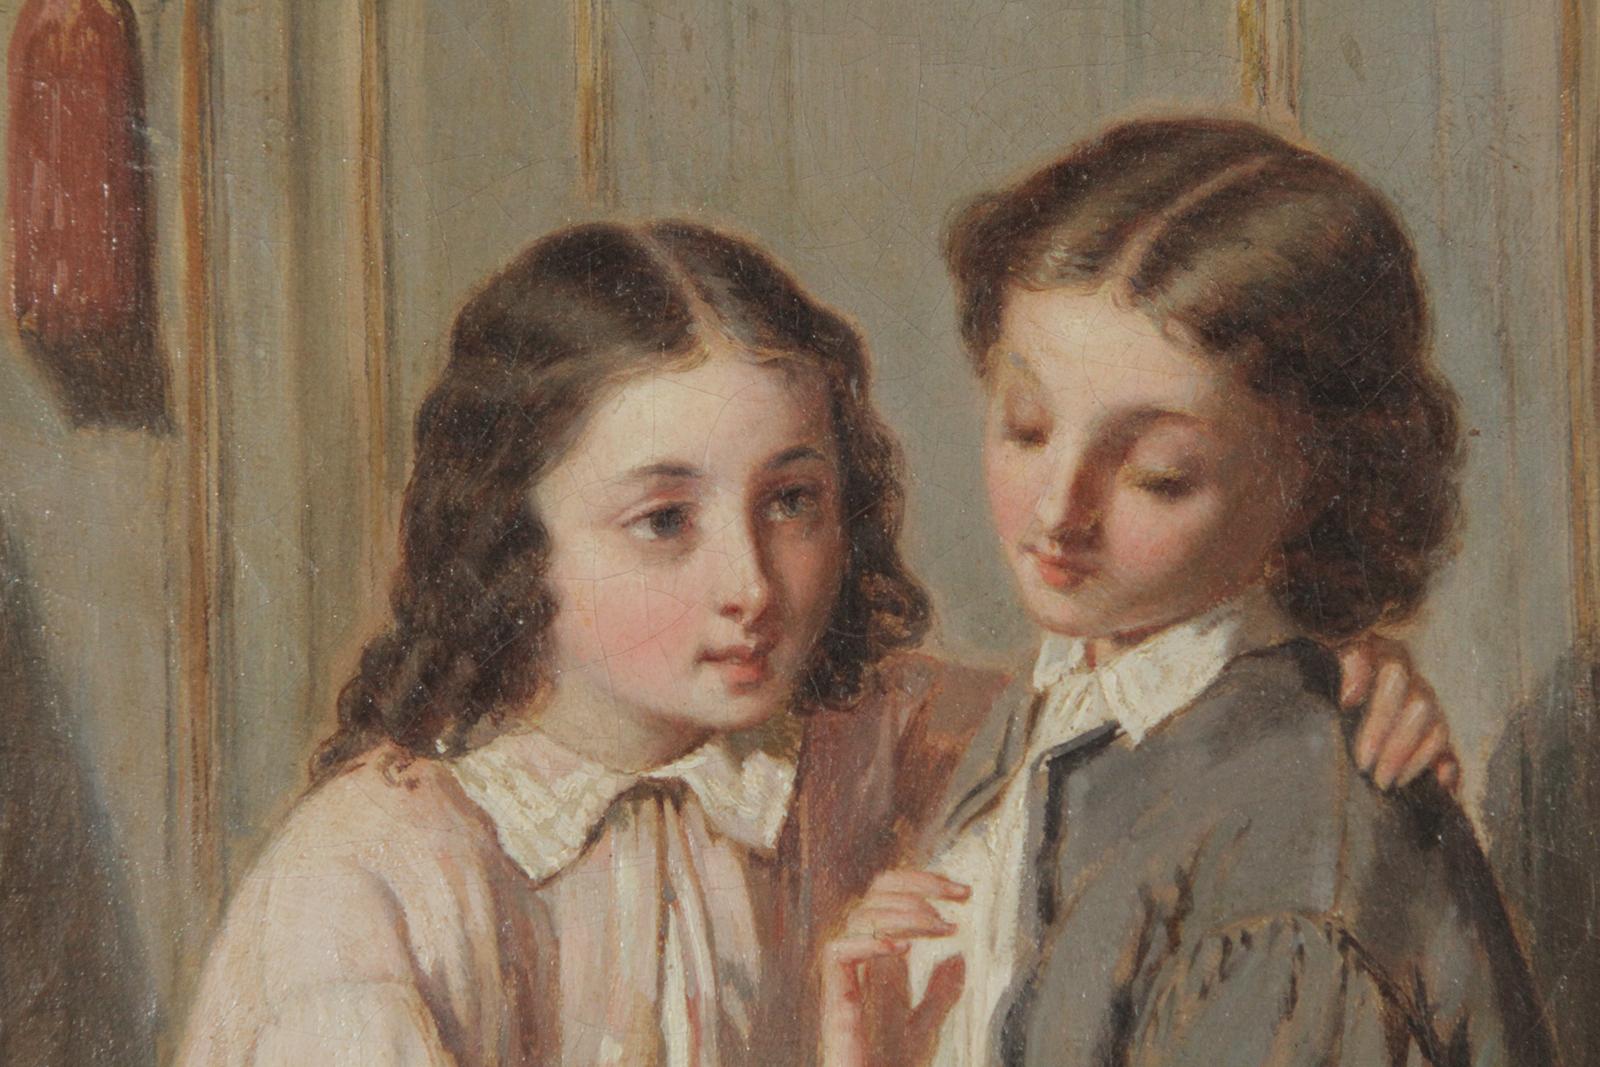 Original oil on canvas interior scene two young women sharing a secret, mid-1800s.
Dimensions: 18” W x 21.5” H x 1.5 D image 12.25